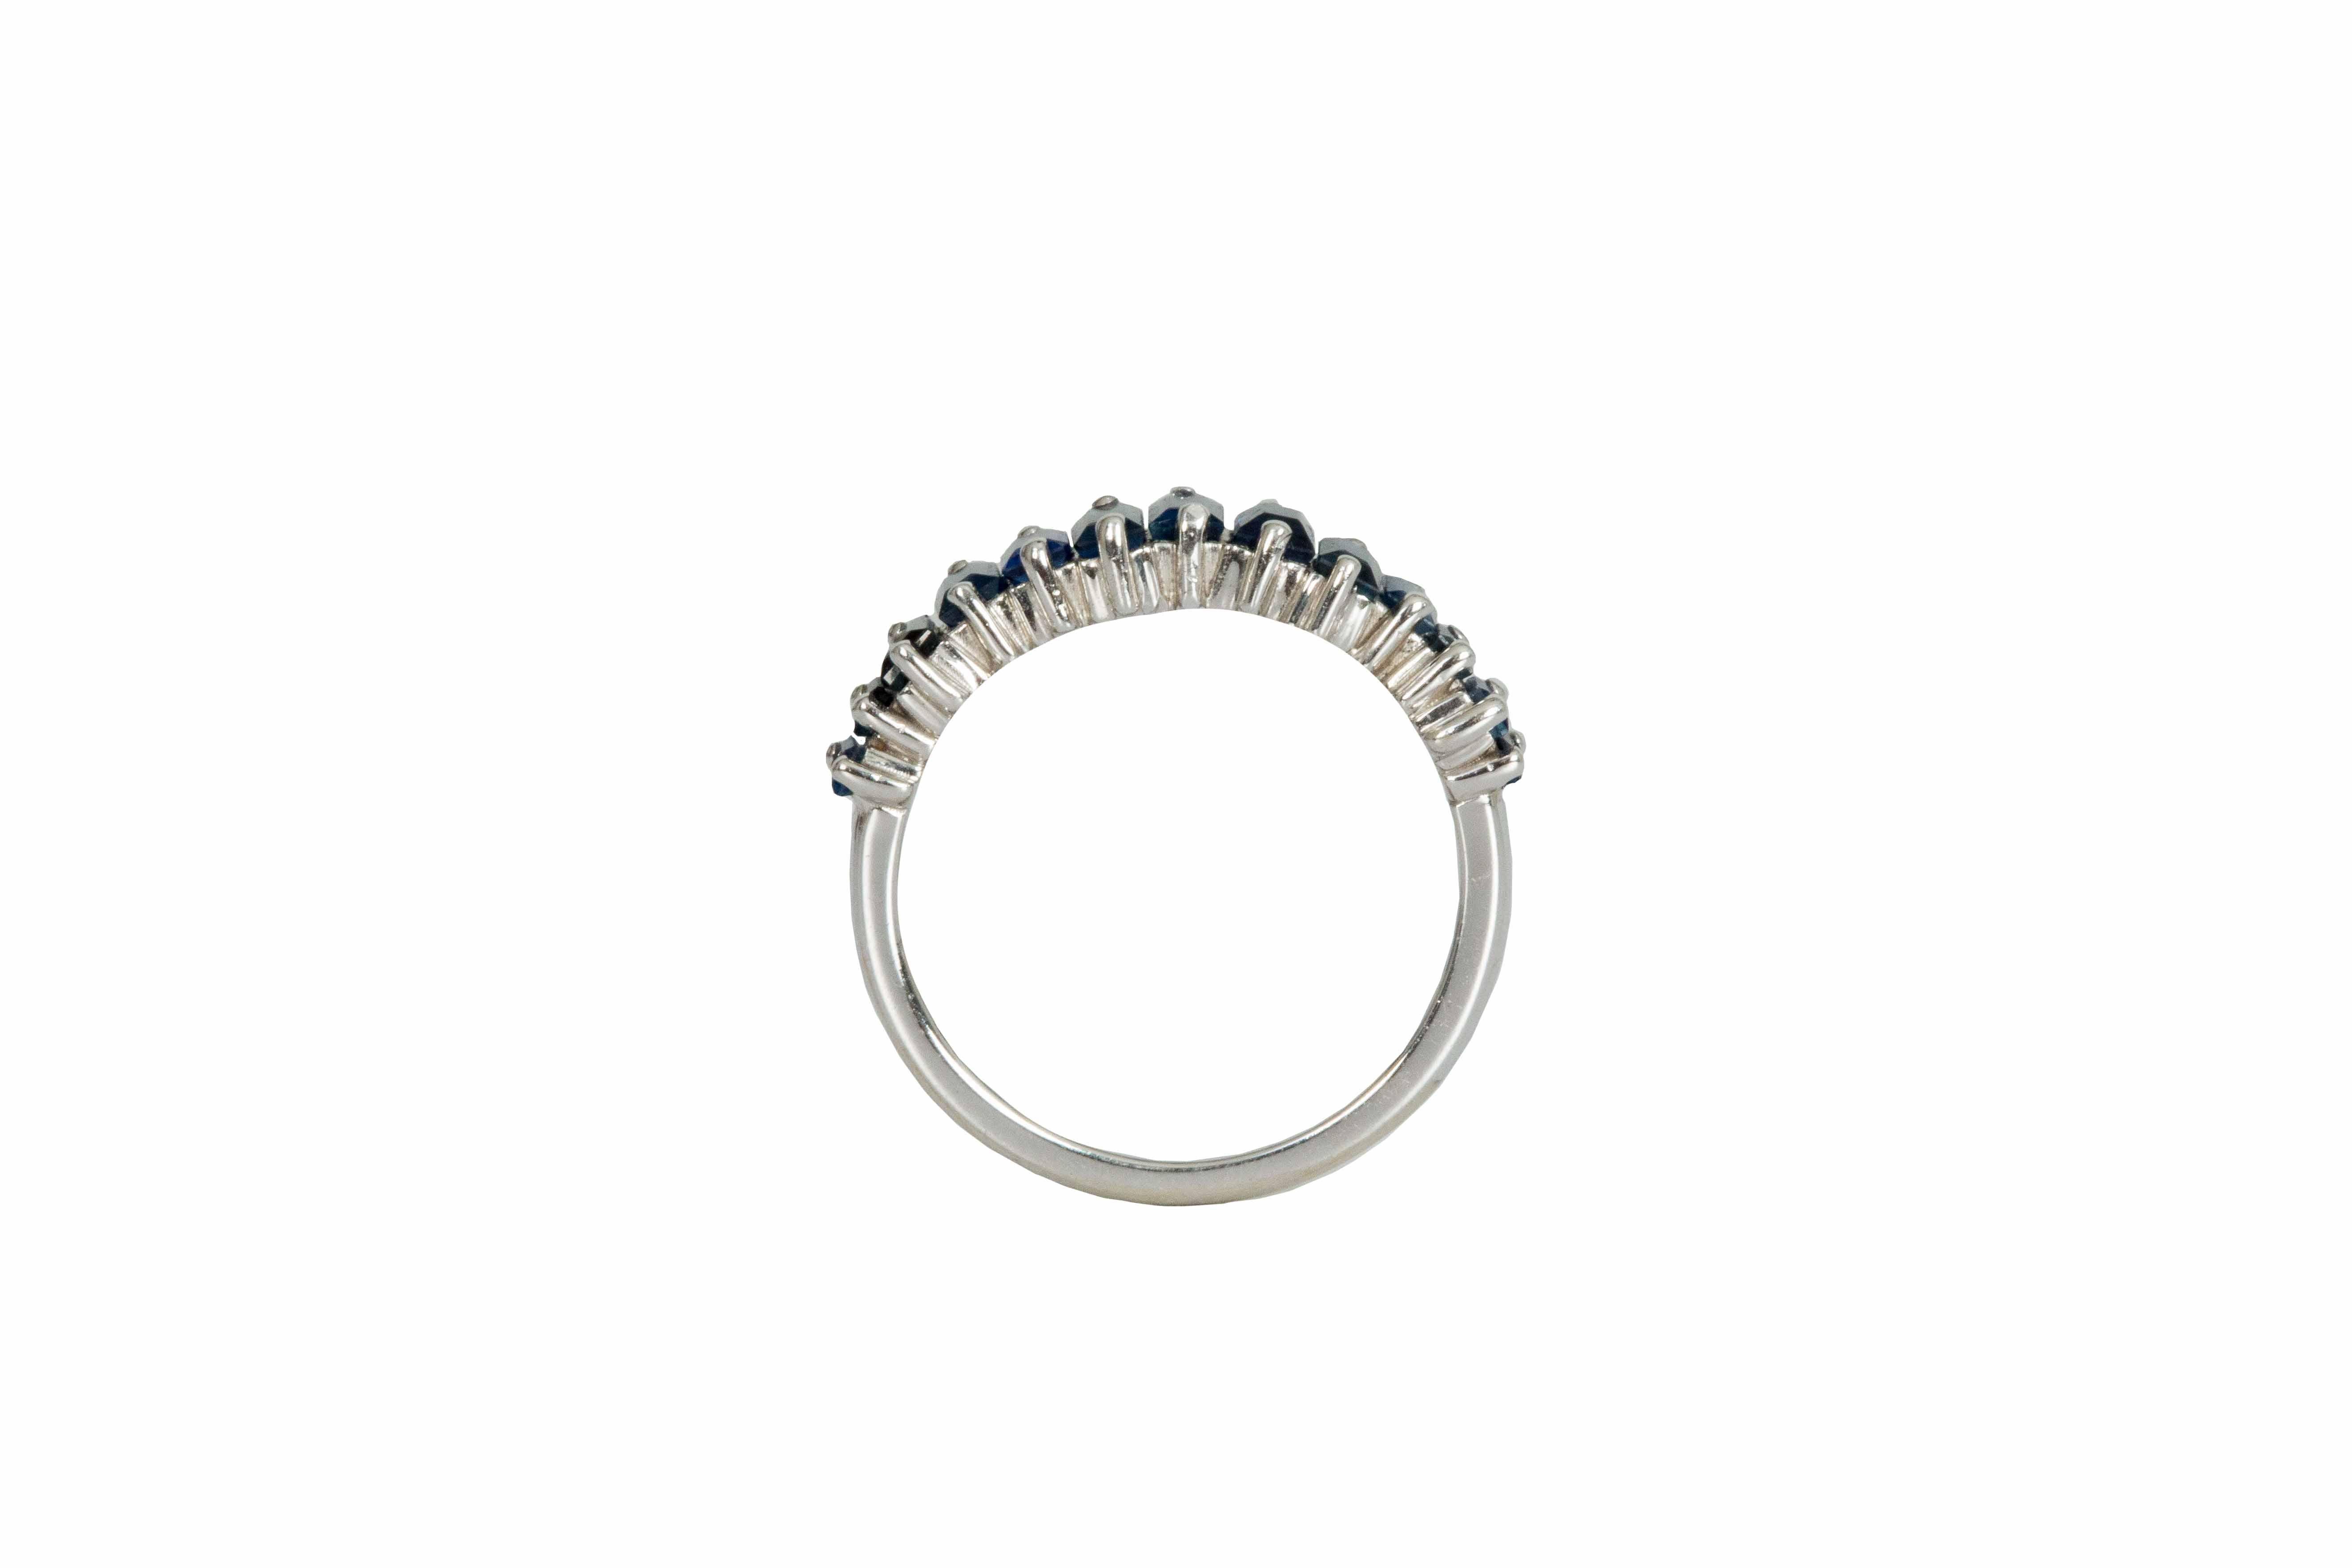 18 carat white gold band with 14 baguette cut natural sapphires weighing 1.70 carats total. Our sapphires are hand selected by our team of experts and carefully set unevenly to create a fascinating composition. A twist on tradition this 